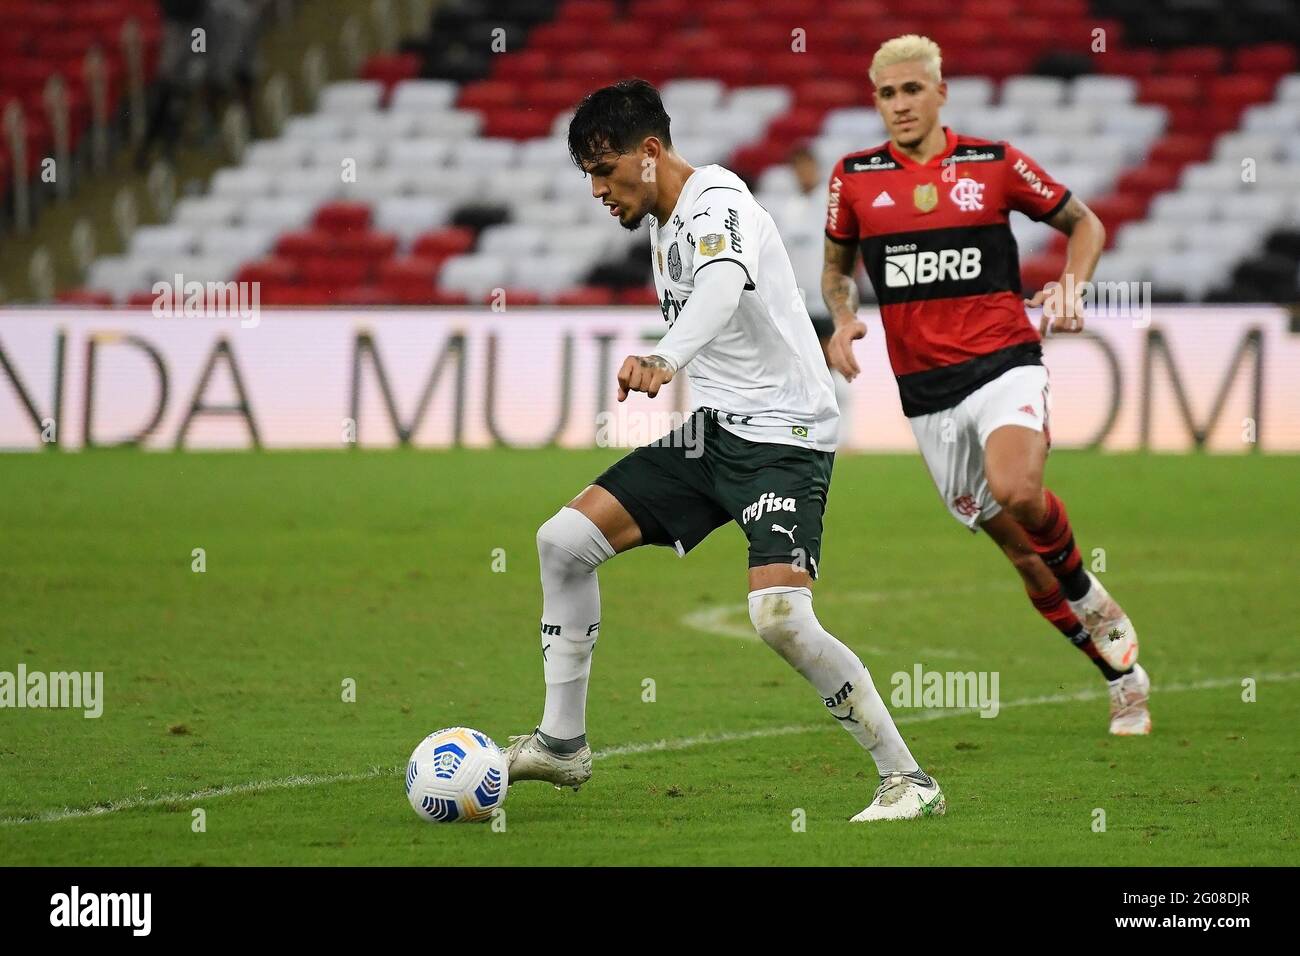 Rio de Janeiro, Brazil, May 30, 2021. The football player from the Palmeiras team, during a match against Flamengo for the 2021 Brazilian championship Stock Photo